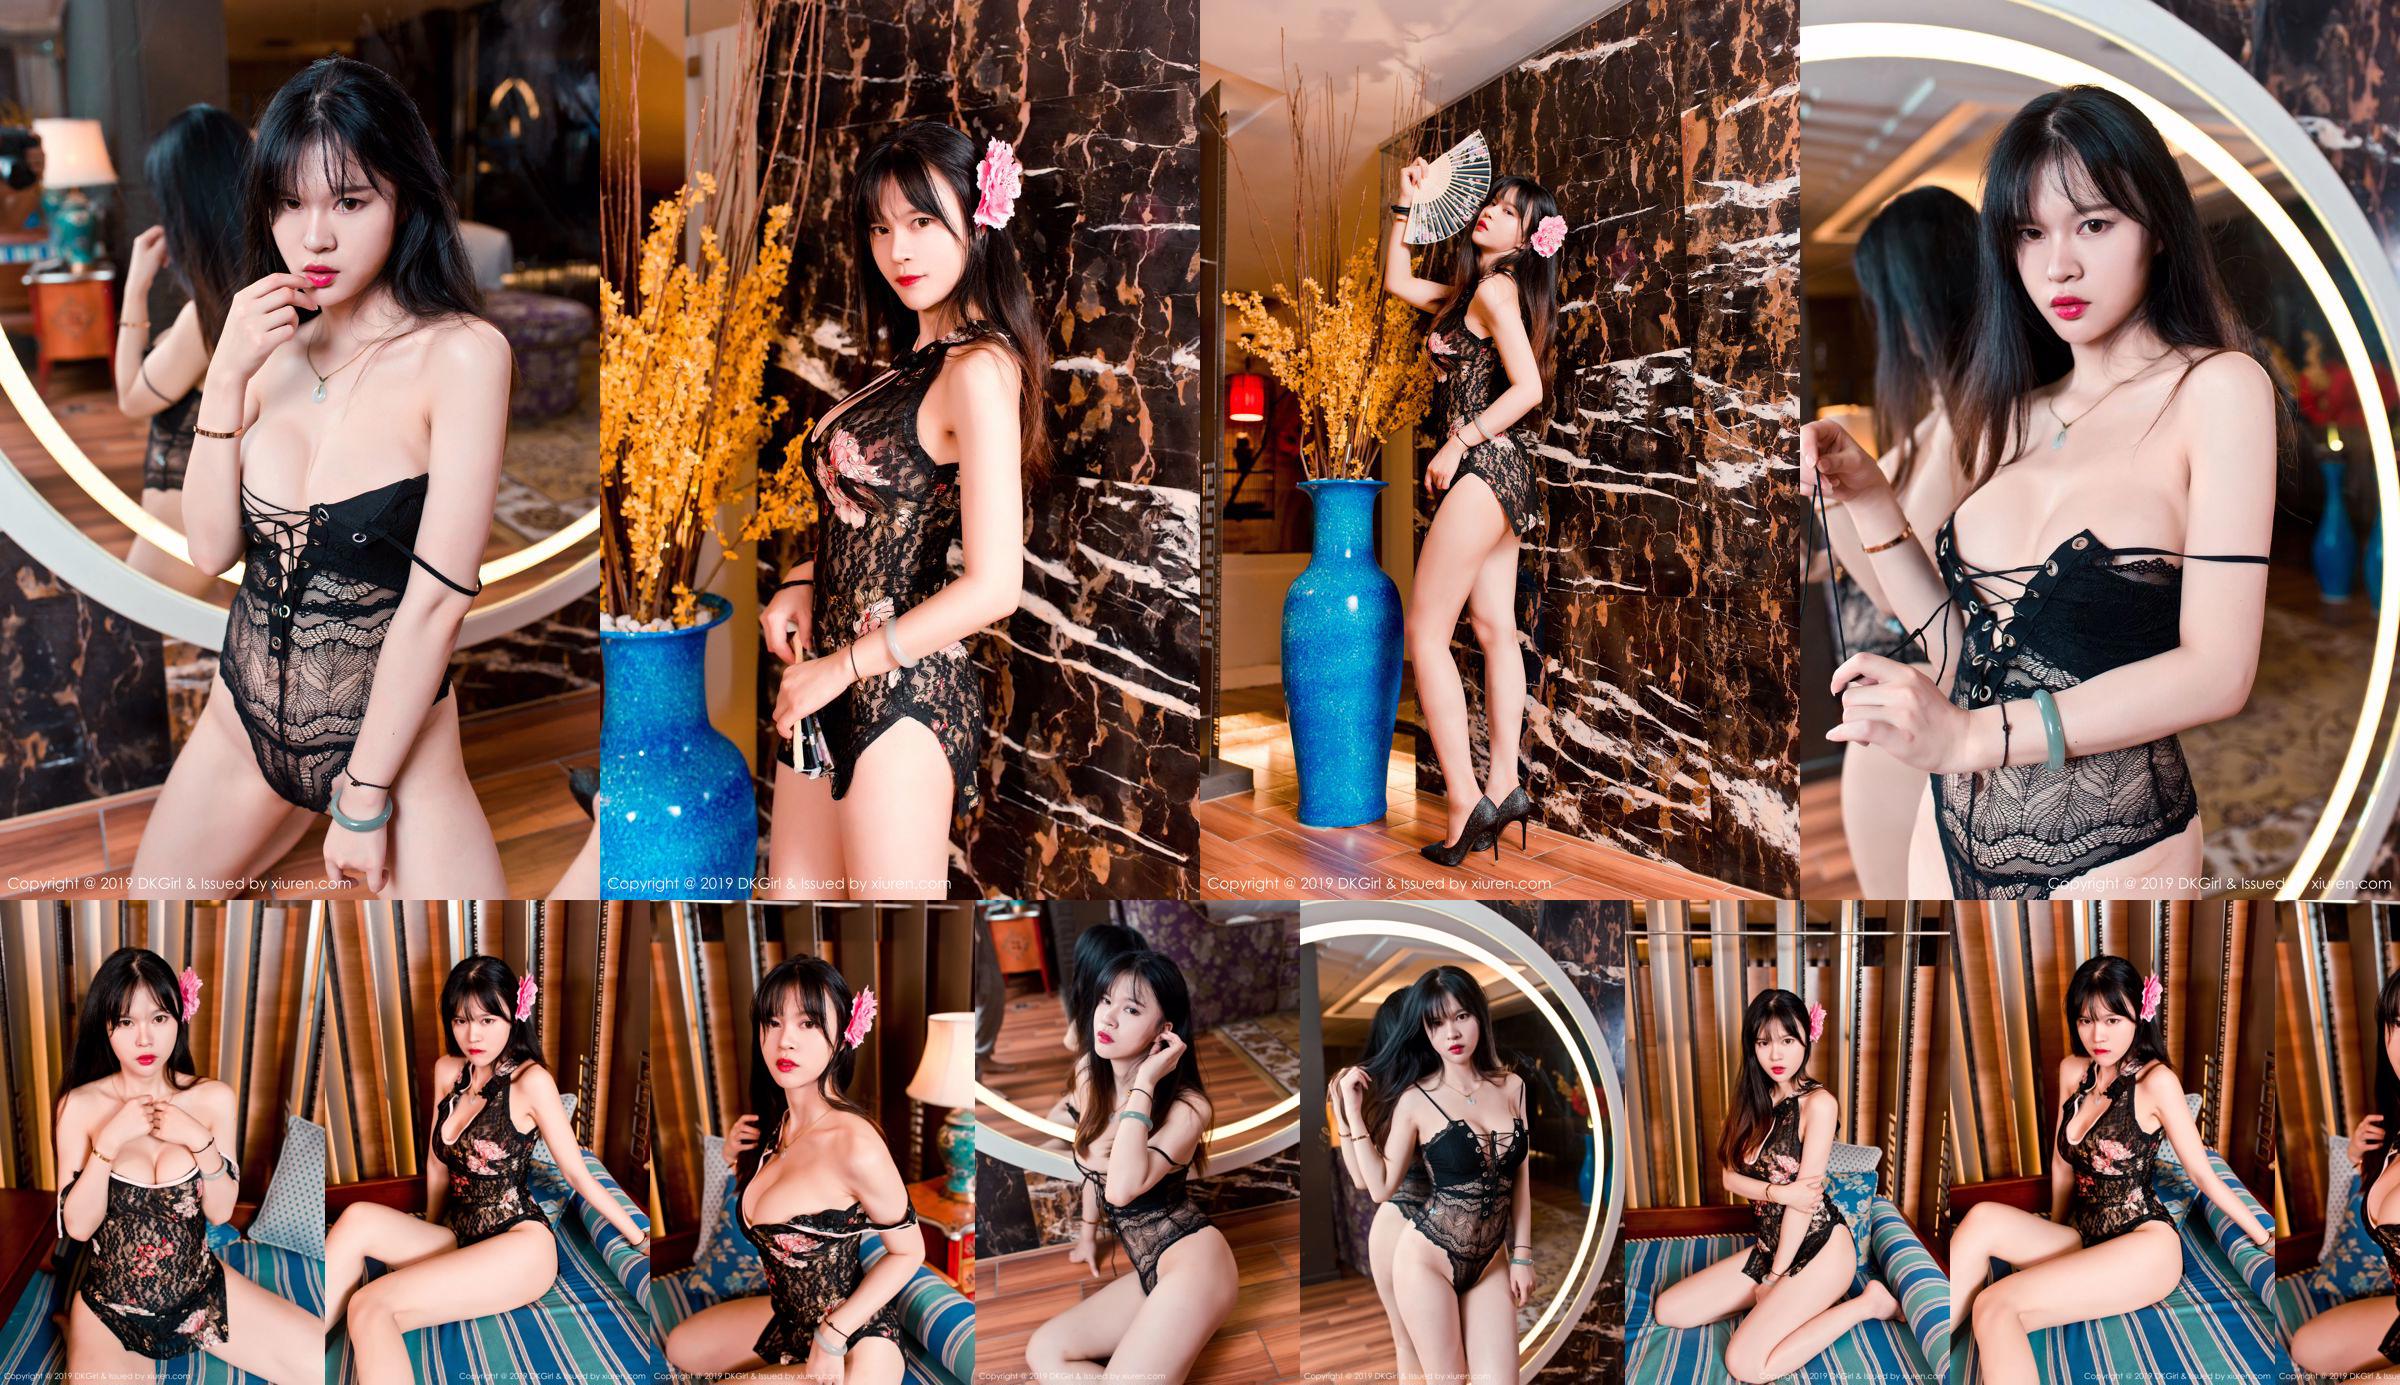 Peach marry "Delicious Hollow Cheongsam and Temptation Lace Underwear" [DKGirl] Vol.093 No.f7556c Page 1